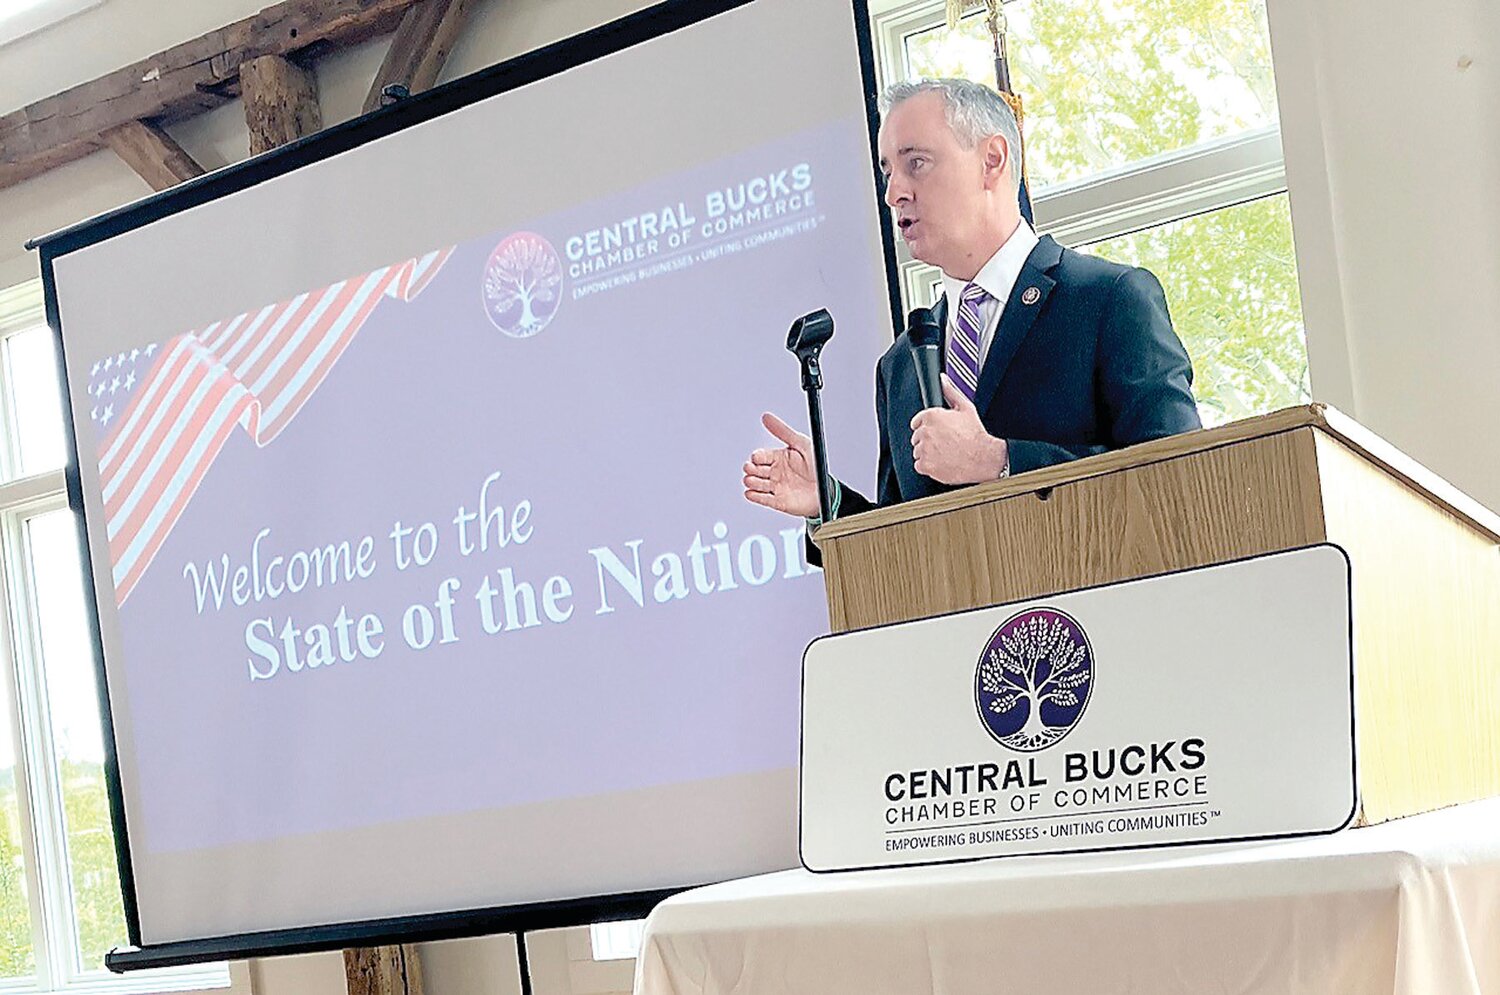 U.S. Rep. Brian Fitzpatrick, R-1, addresses members of the Central Bucks Chamber of Commerce, Friday during a lunchtime “State of the Nation” speech in Buckingham.